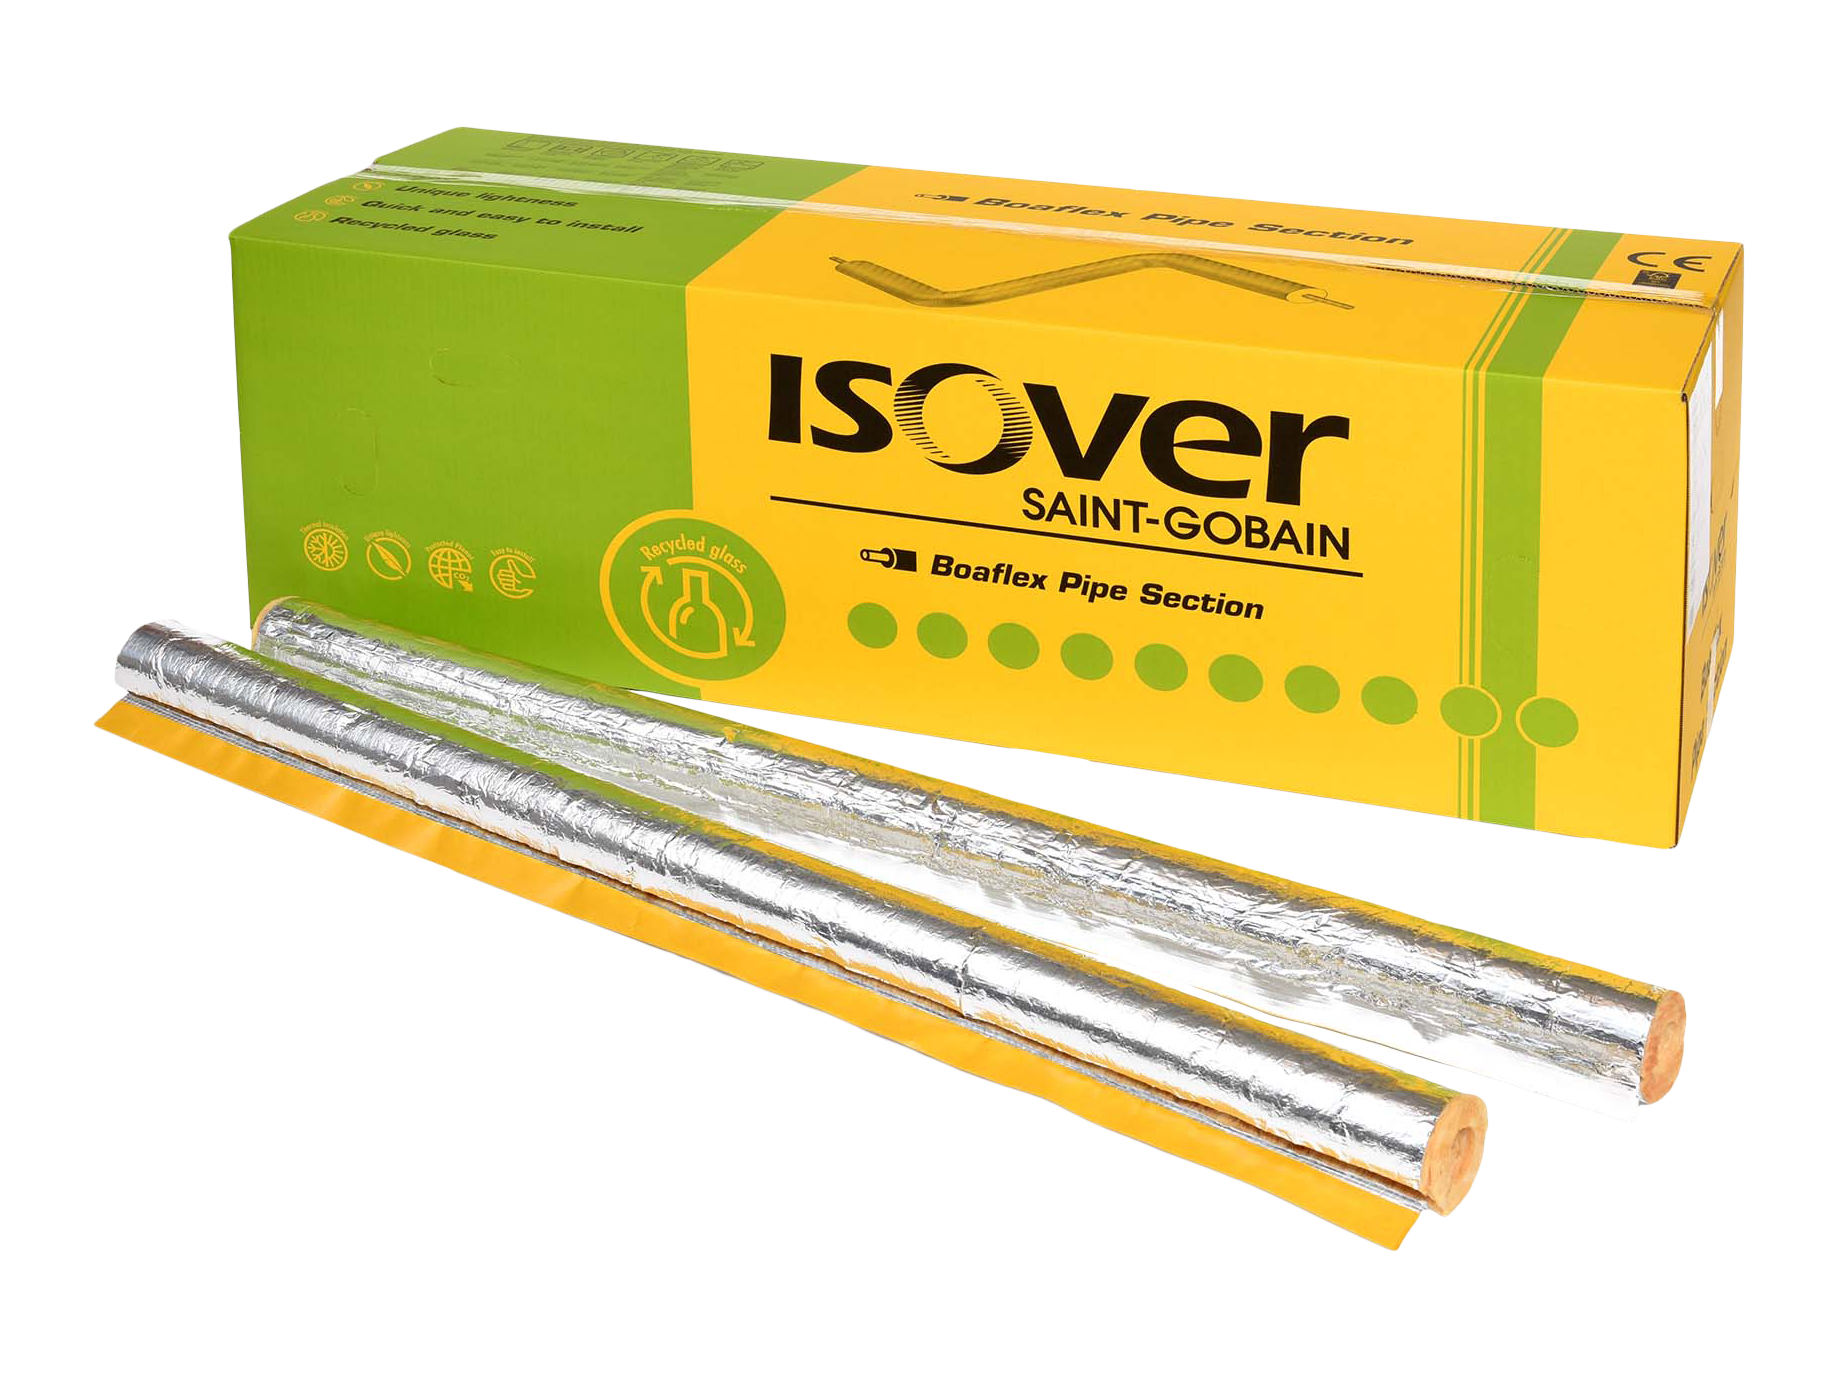 ISOVER Boaflex Pipe Section 54/20